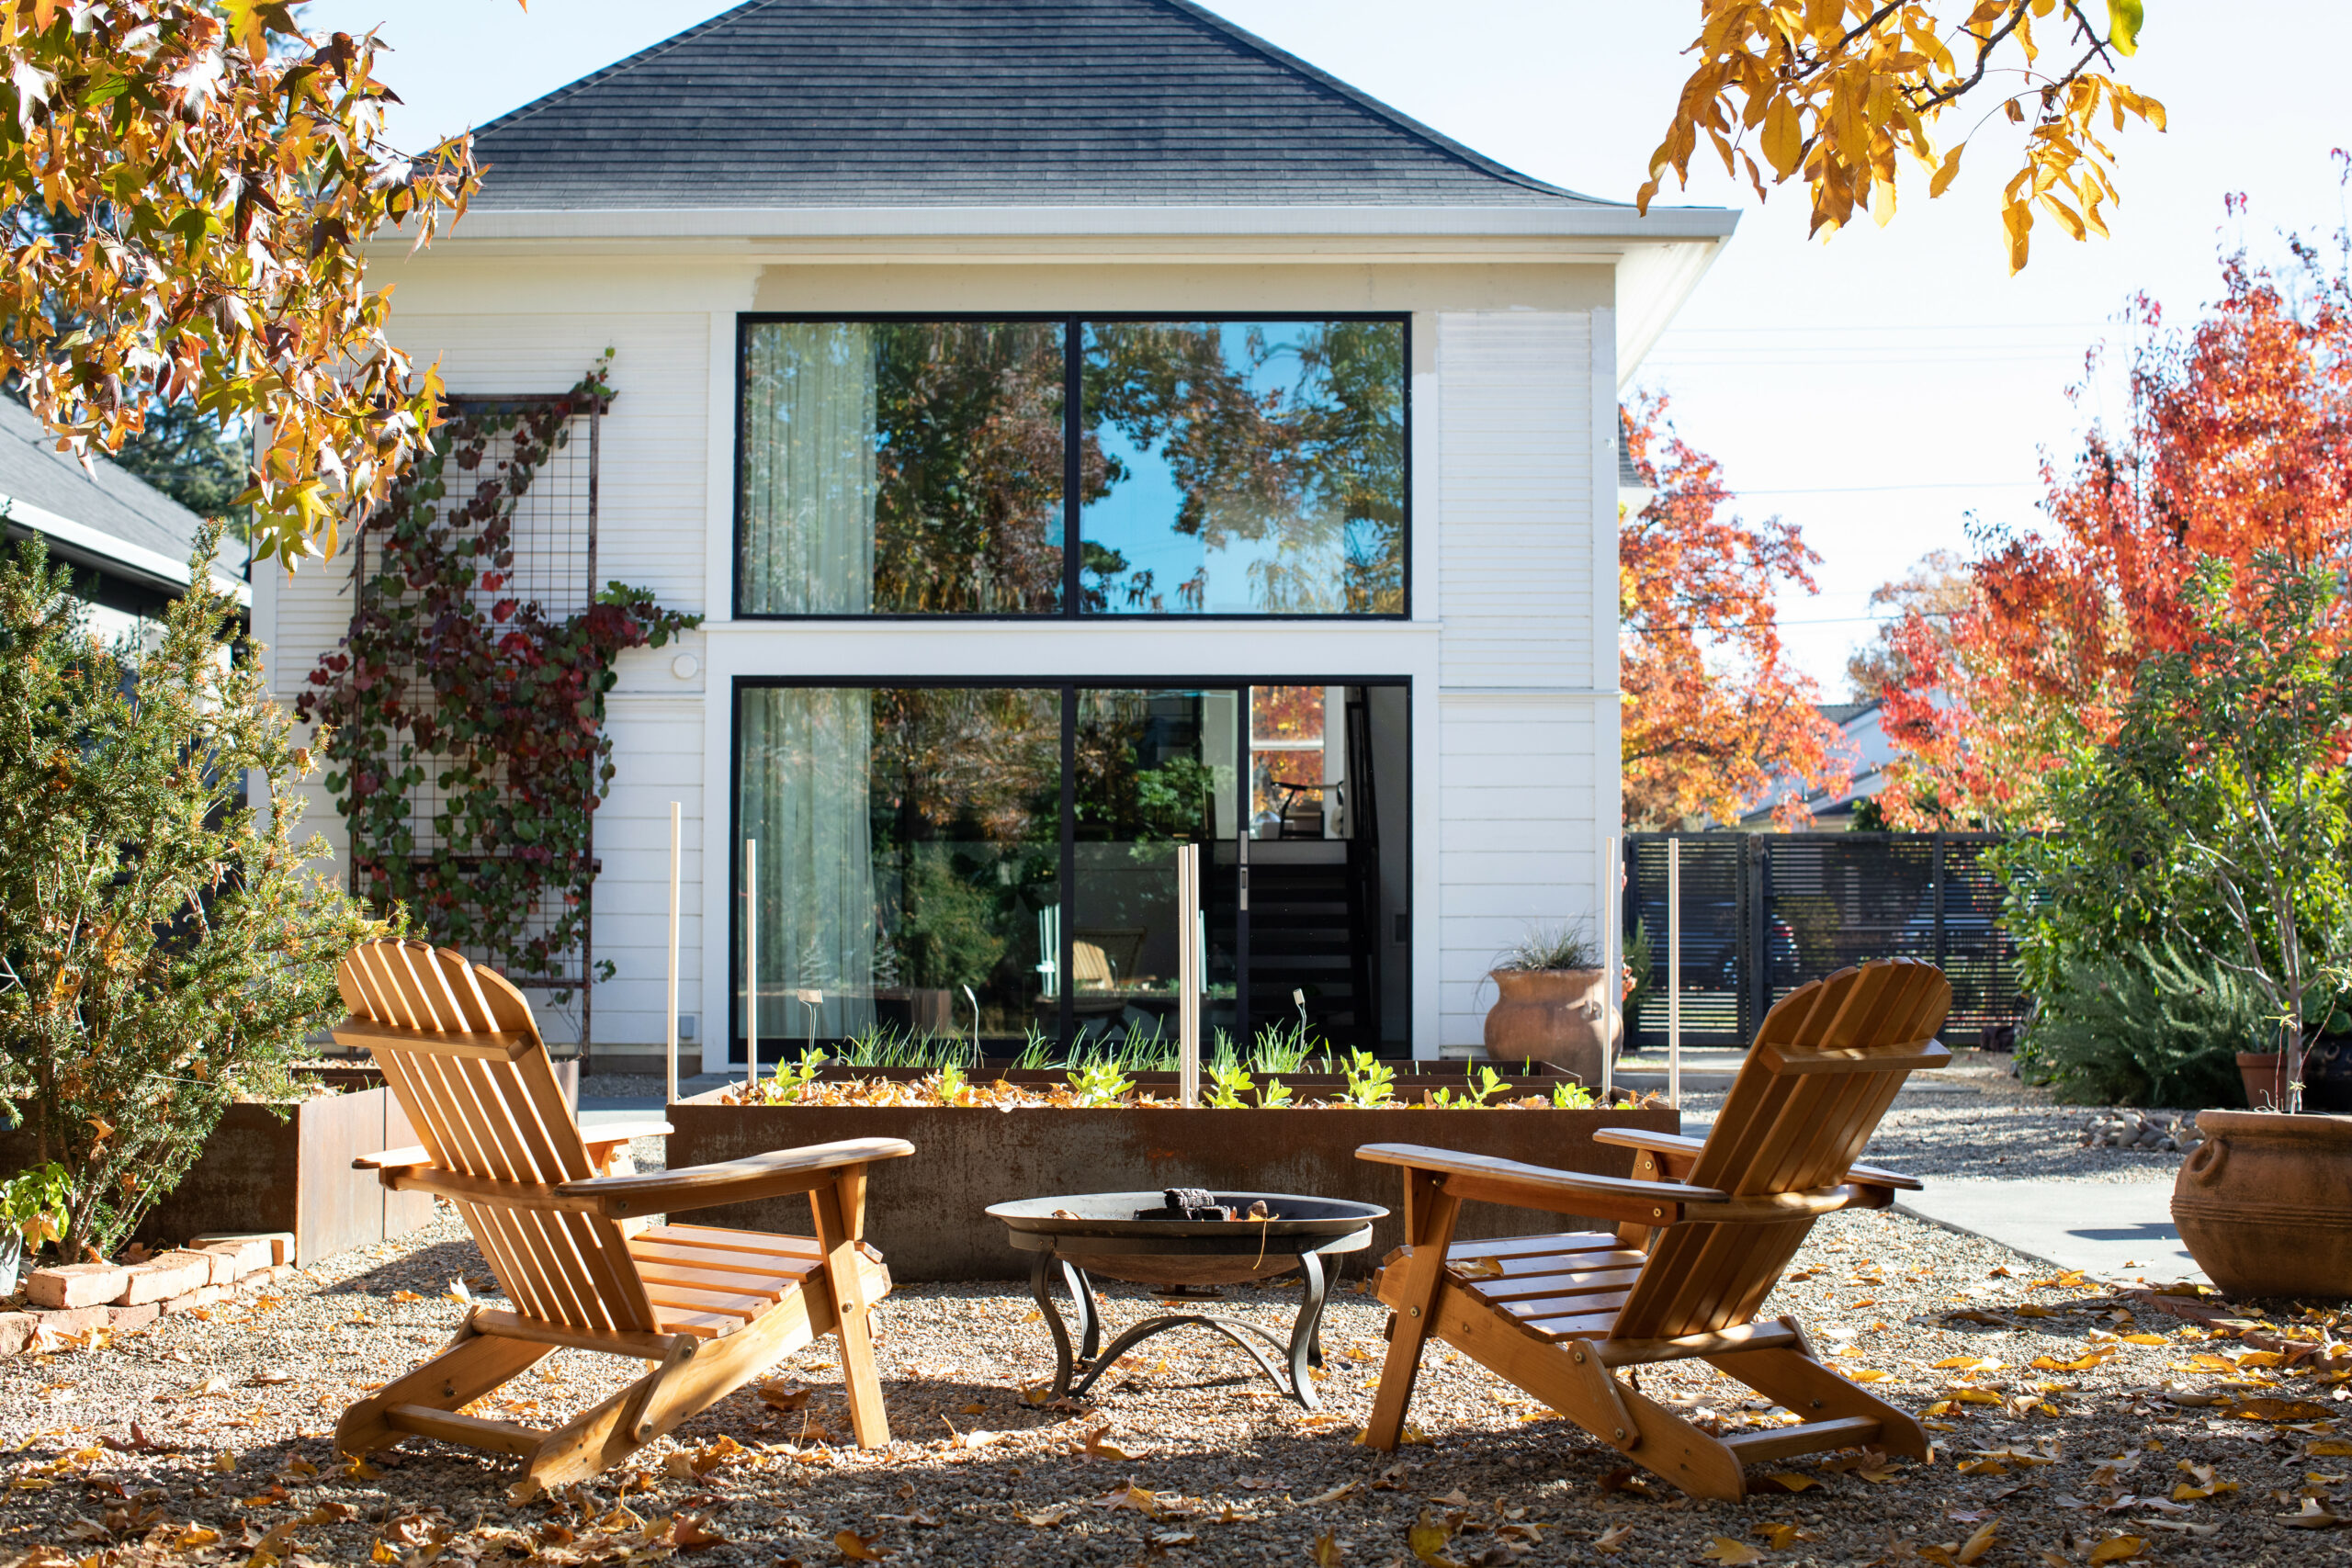 Healdsburg Couple Transforms 100-Year-Old Cottage Into a Modern Home